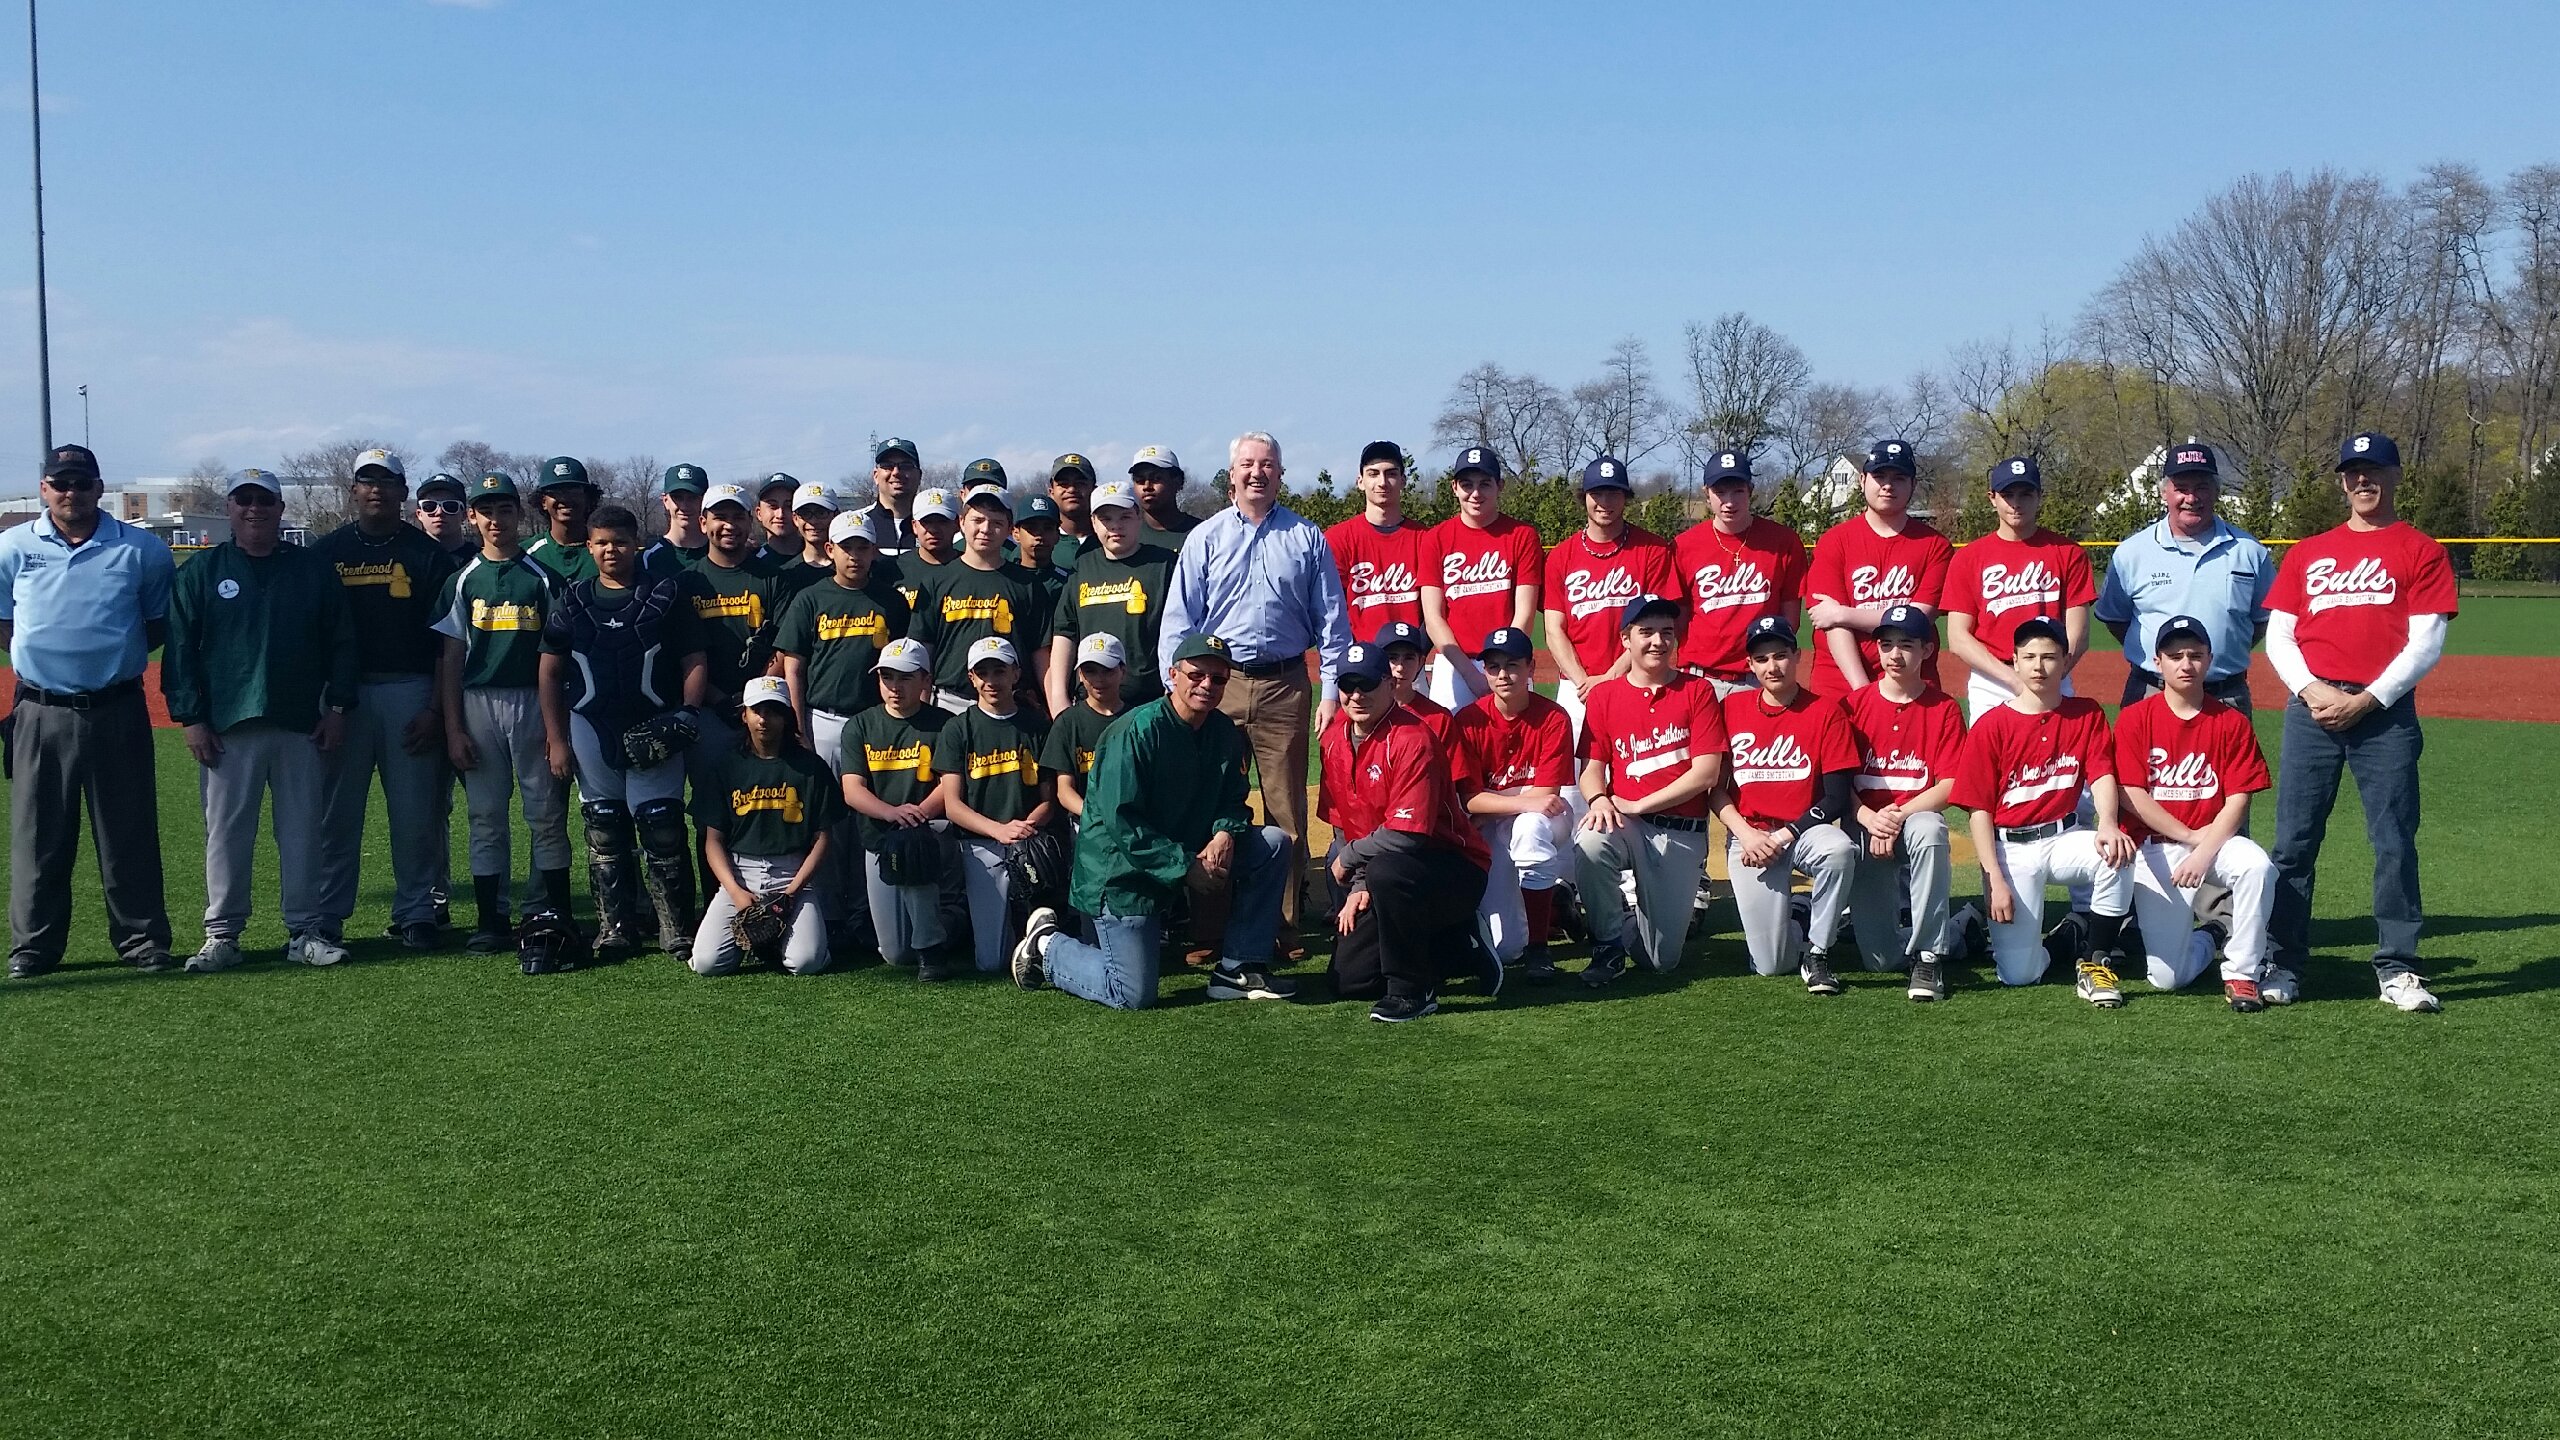 Pictured with New York State Senator Phil Boyle are - Brentwood Travel Baseball's 15 U Brentwood Braves; Brentwood Developmental Program's 2014 Braves Green; the Smithtown Bulls, Coaches and Umpires.